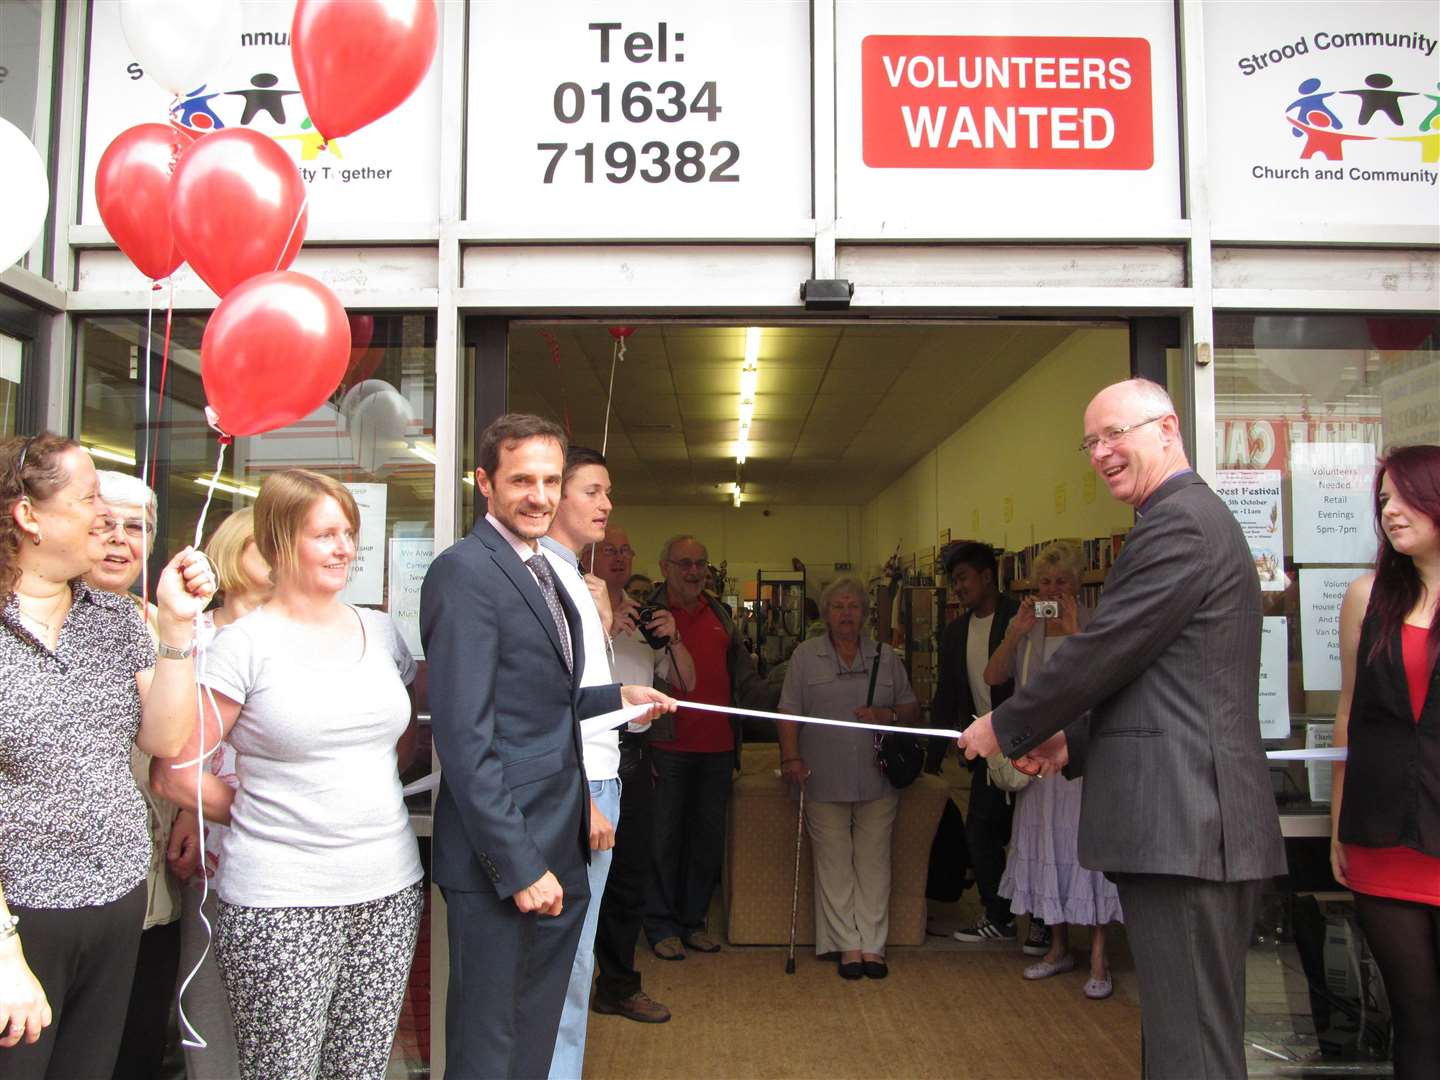 The Bishop of Rochester, Rt Rev James Langstaff, opened the new Strood Community Project Shop